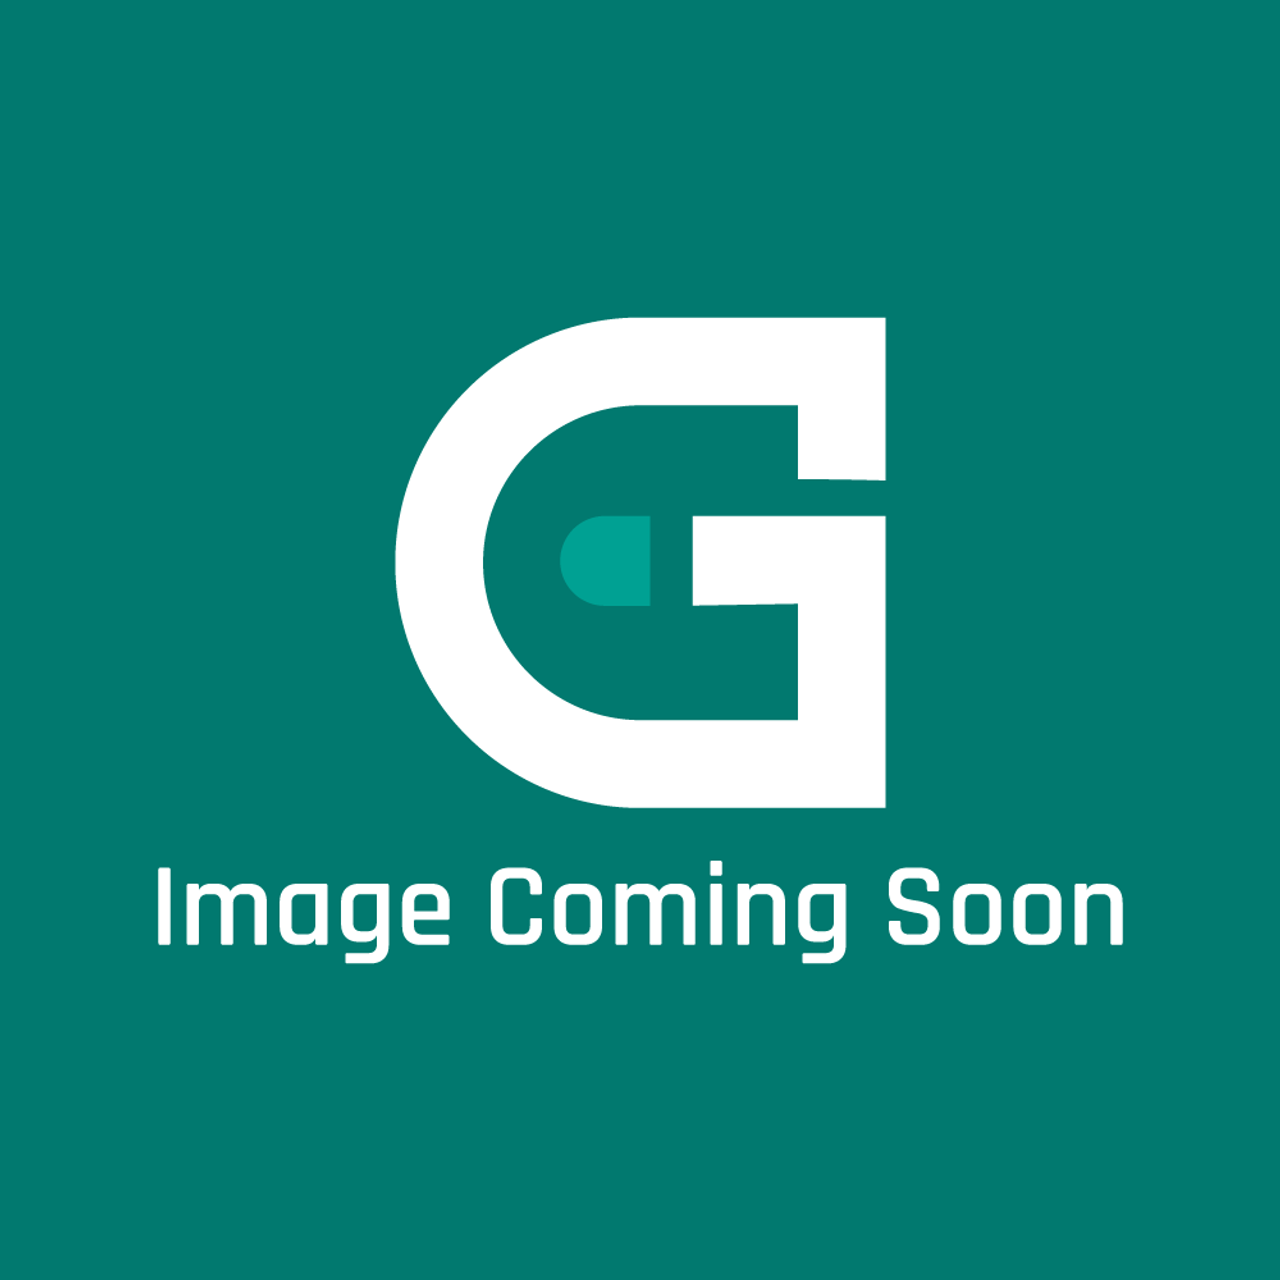 AGA Marvel P027641 - Rear Insulation Tall Oven -Pkr - Image Coming Soon!